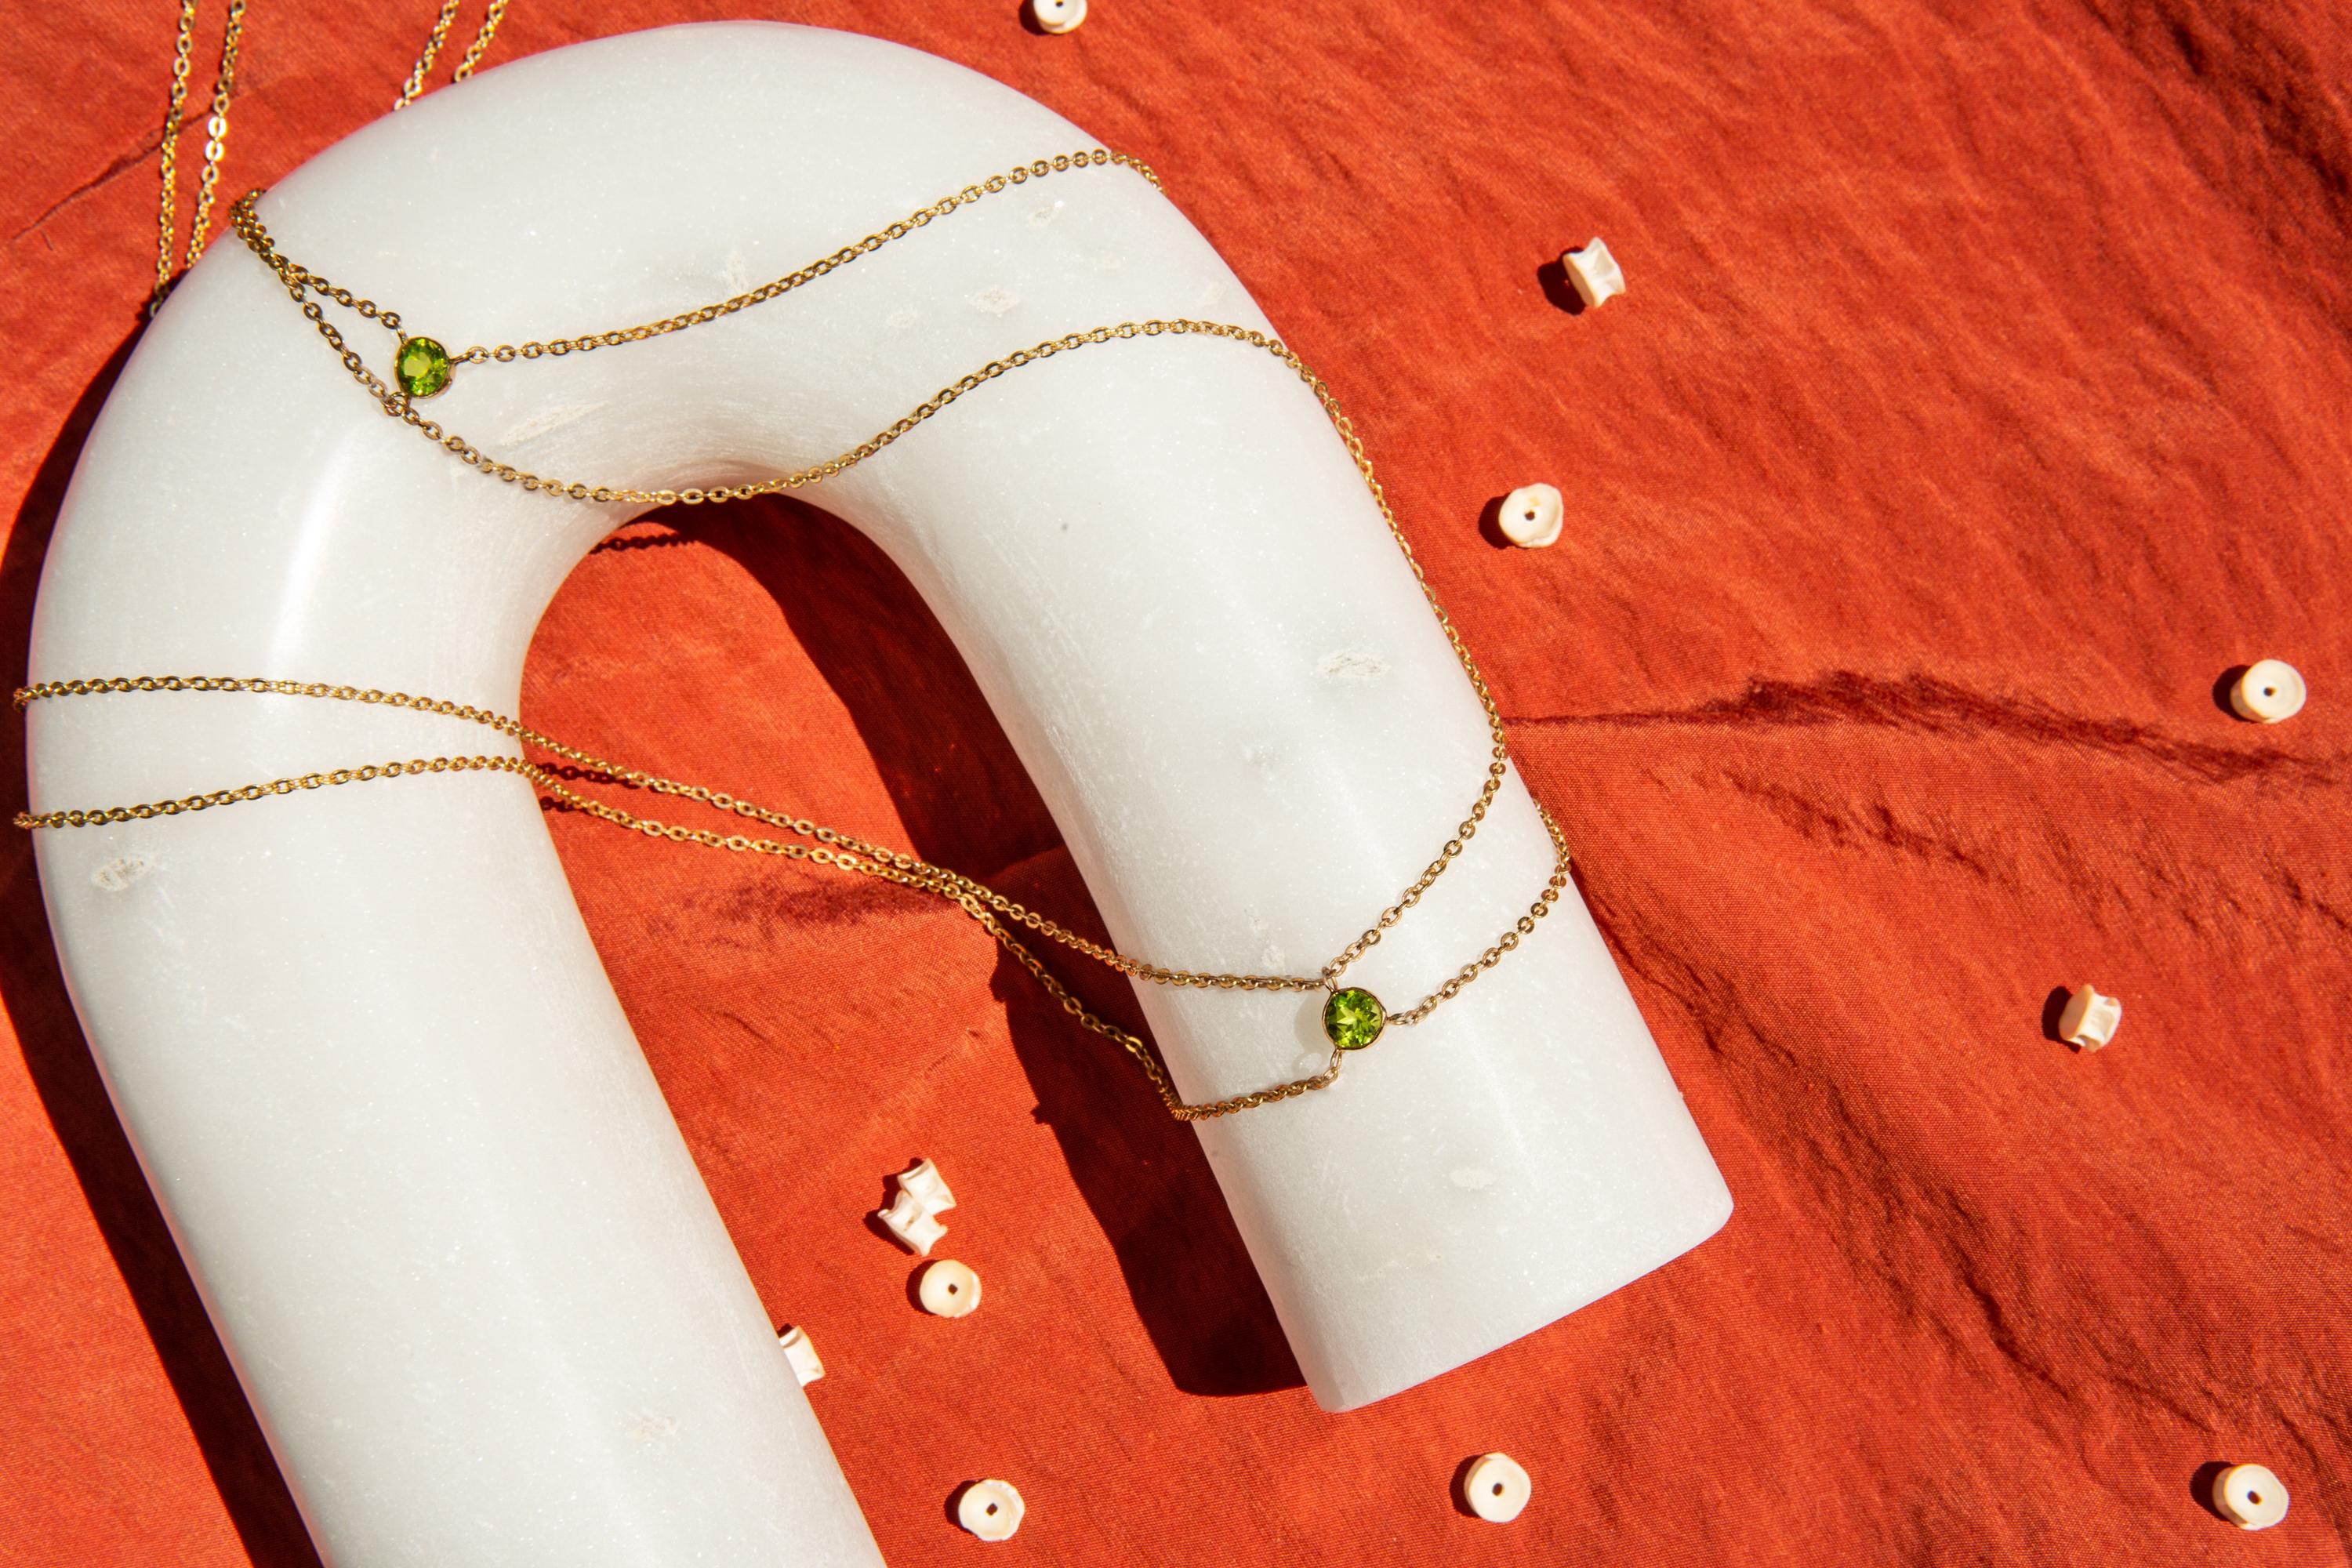 The Summon 14k gold waist chain by Ilium Wing is a poem to the feminine. As some peridot crystals have been found in meteorites, this piece features three dip-and-join meeting points across the hips, reminding us that a woman's body is the meeting